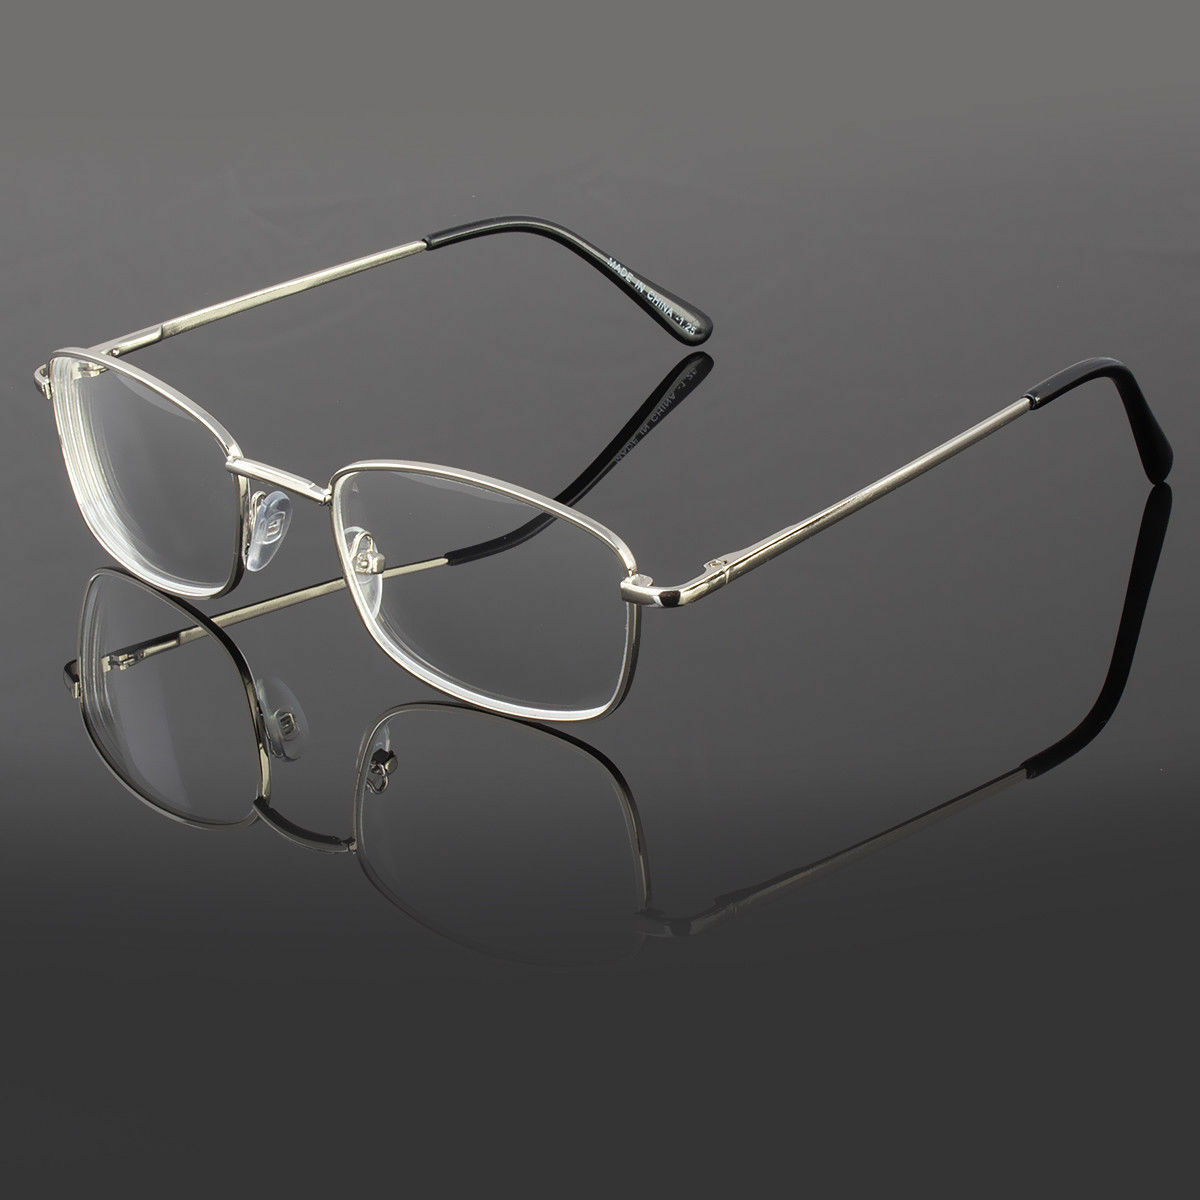 NEARSIGHTED READING METAL GLASSES FOR DISTANCE MYOPIA NEGATIVE POWER -0 ...